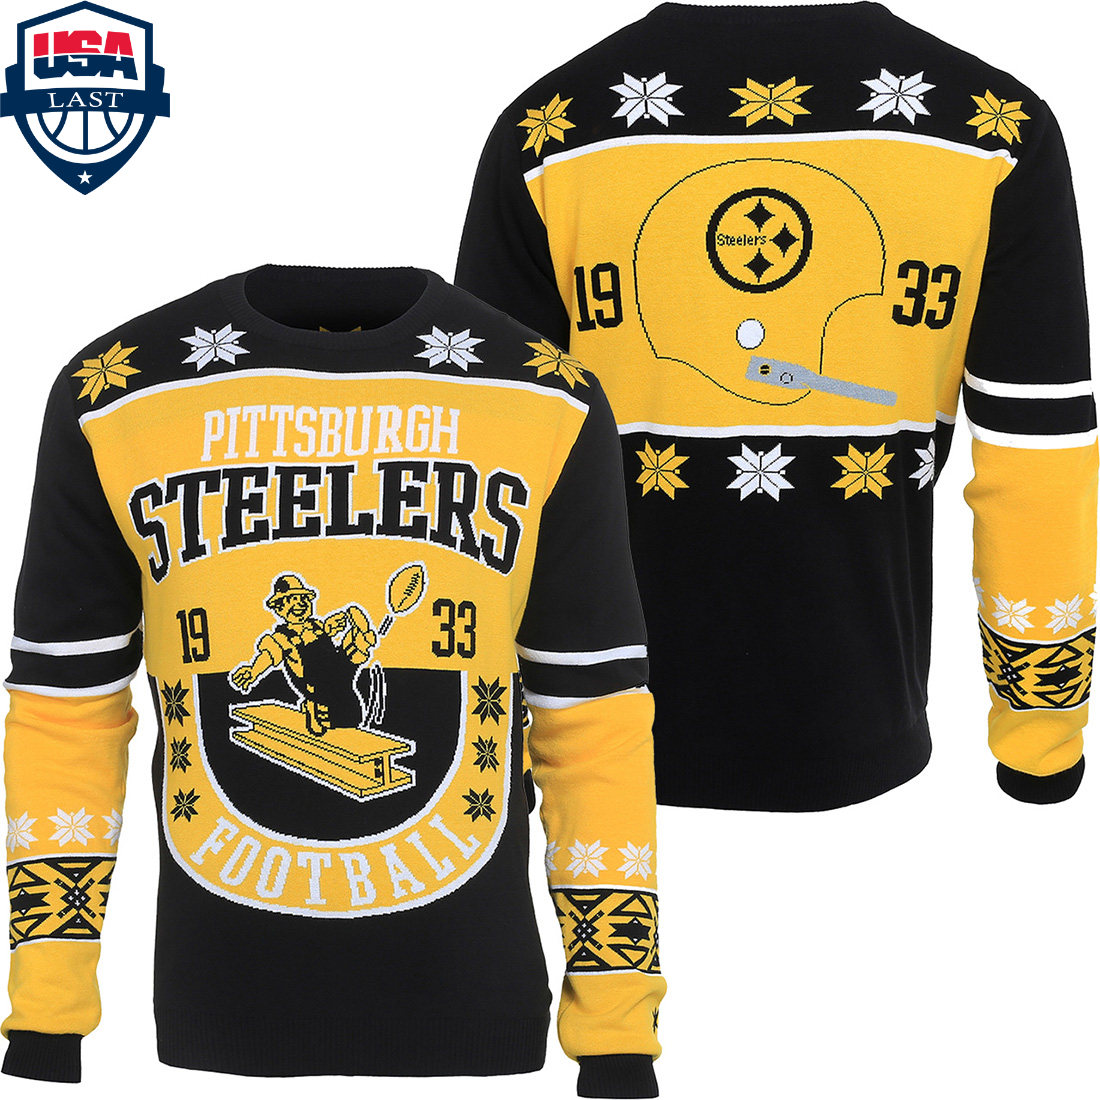 Pittsburgh-Steelers-NFL-Retro-Cotton-Sweater